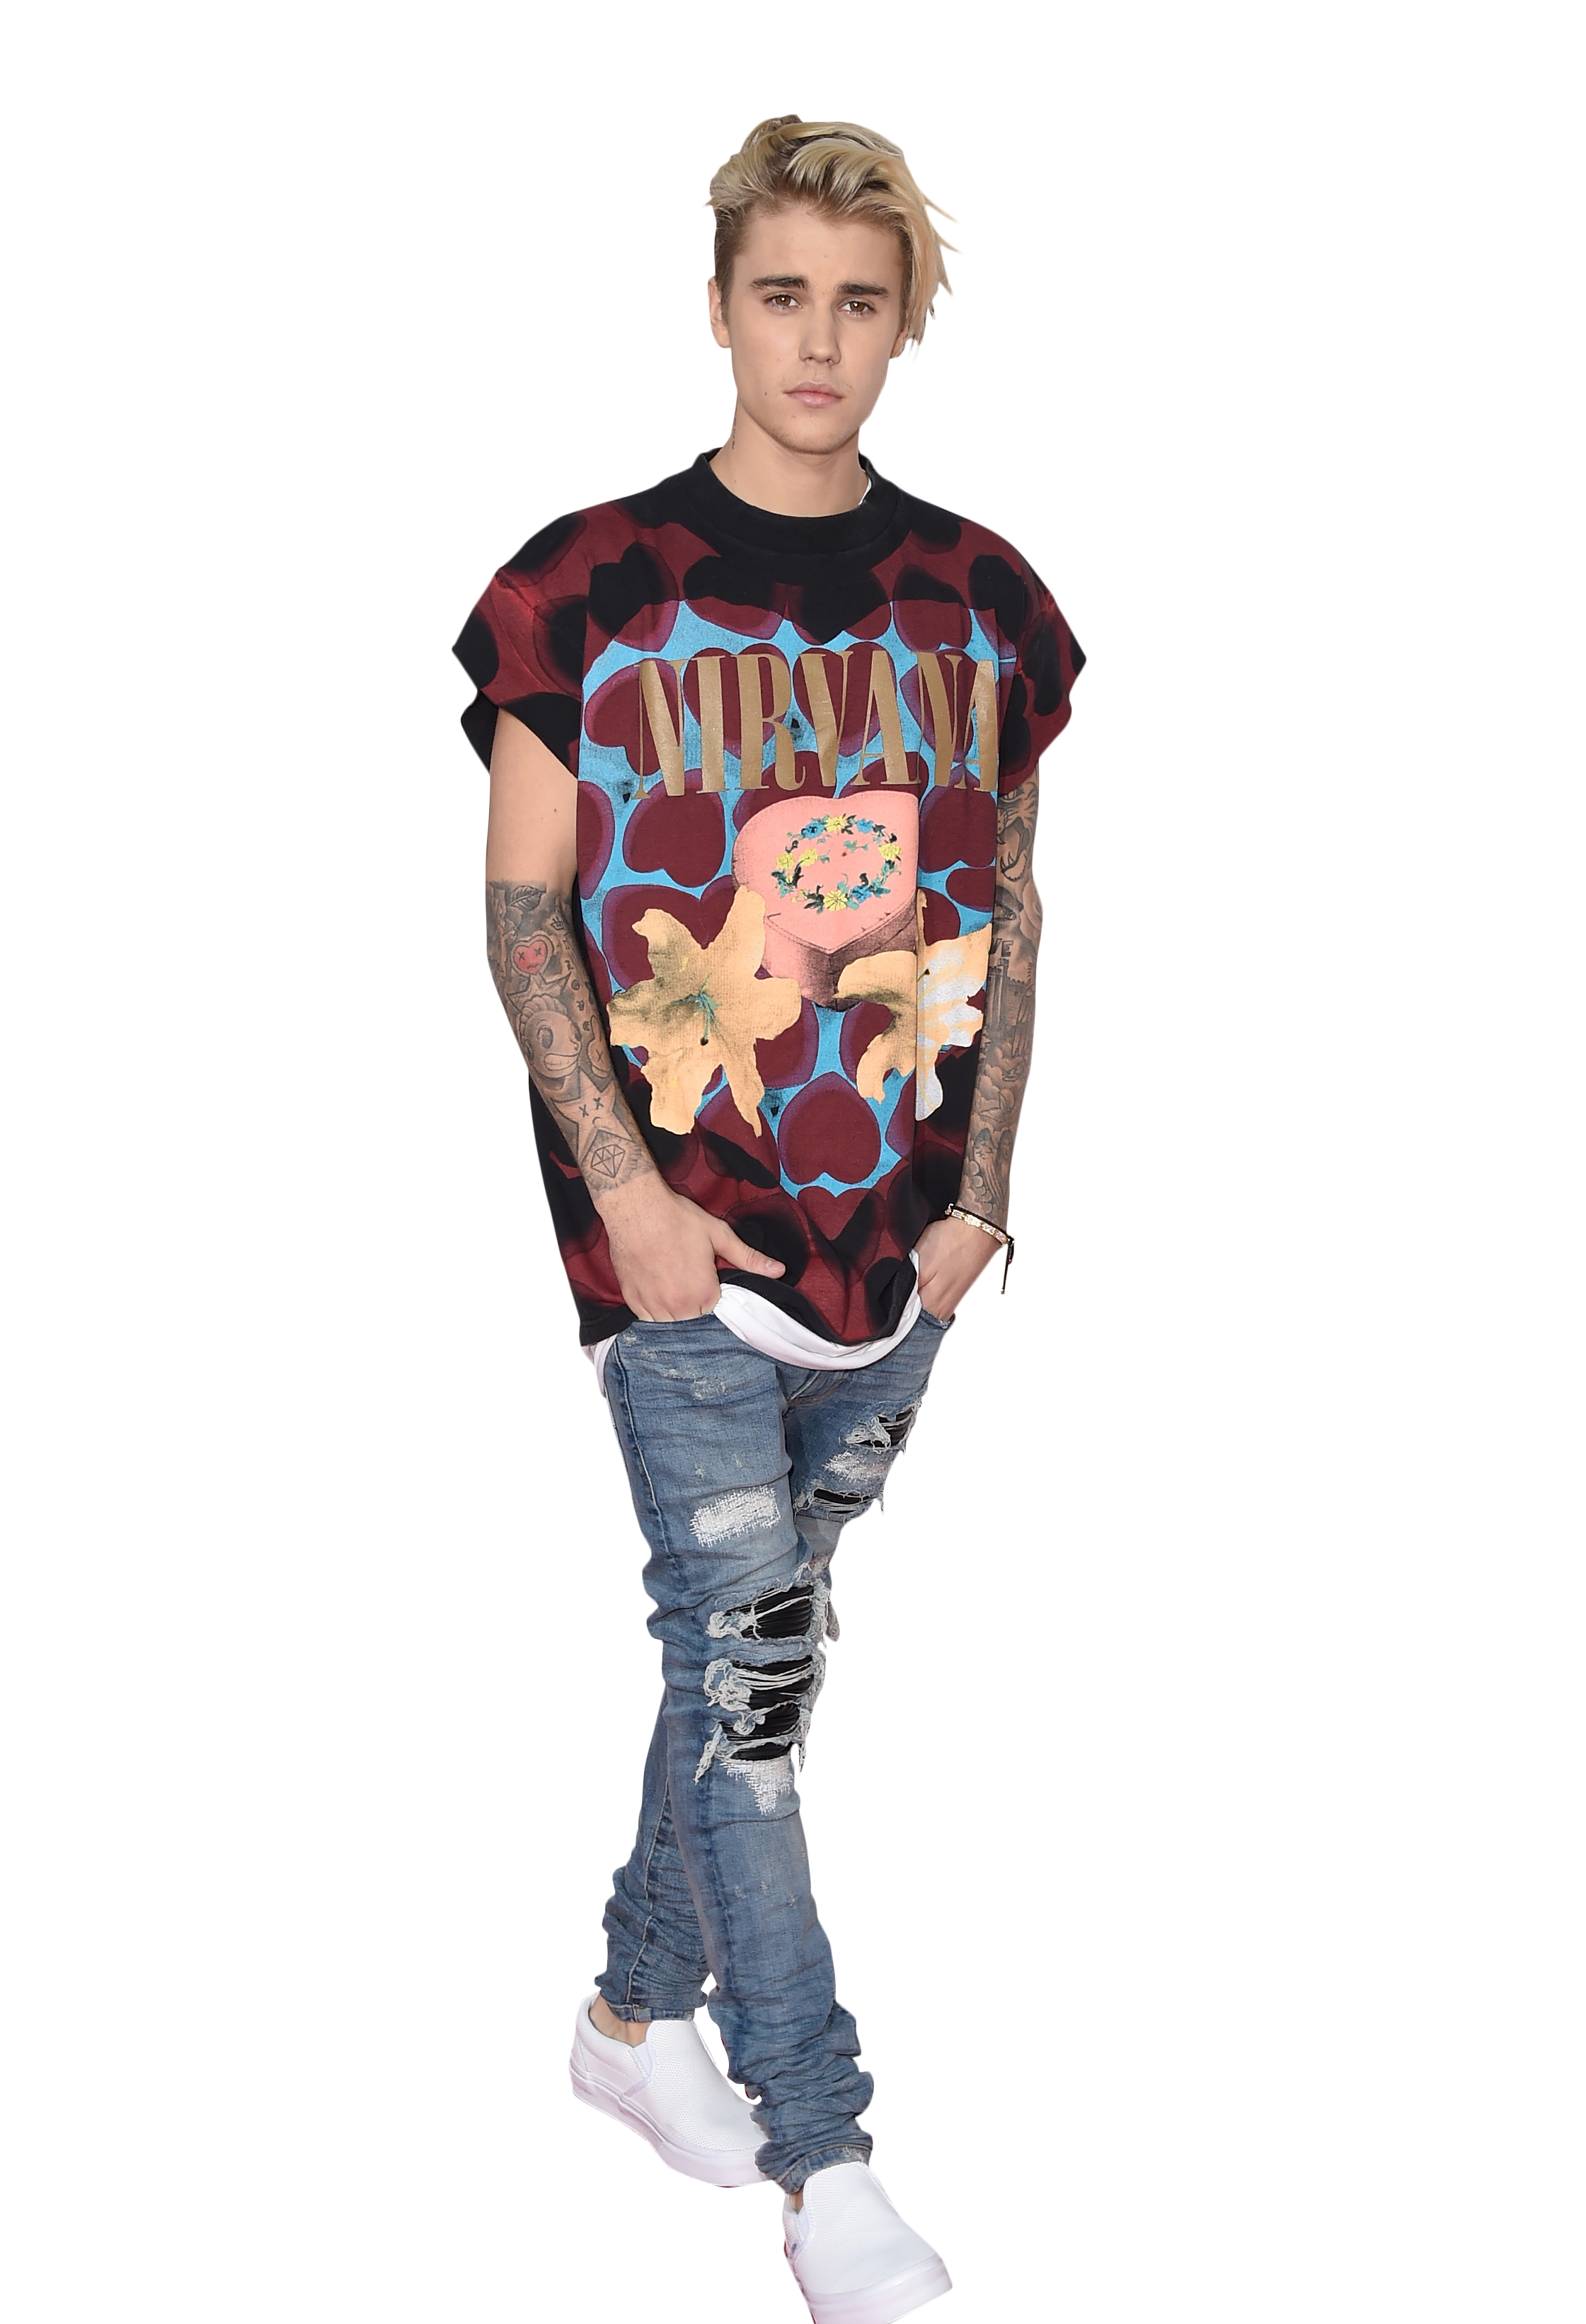 Justin Bieber Relaxed PNG Image